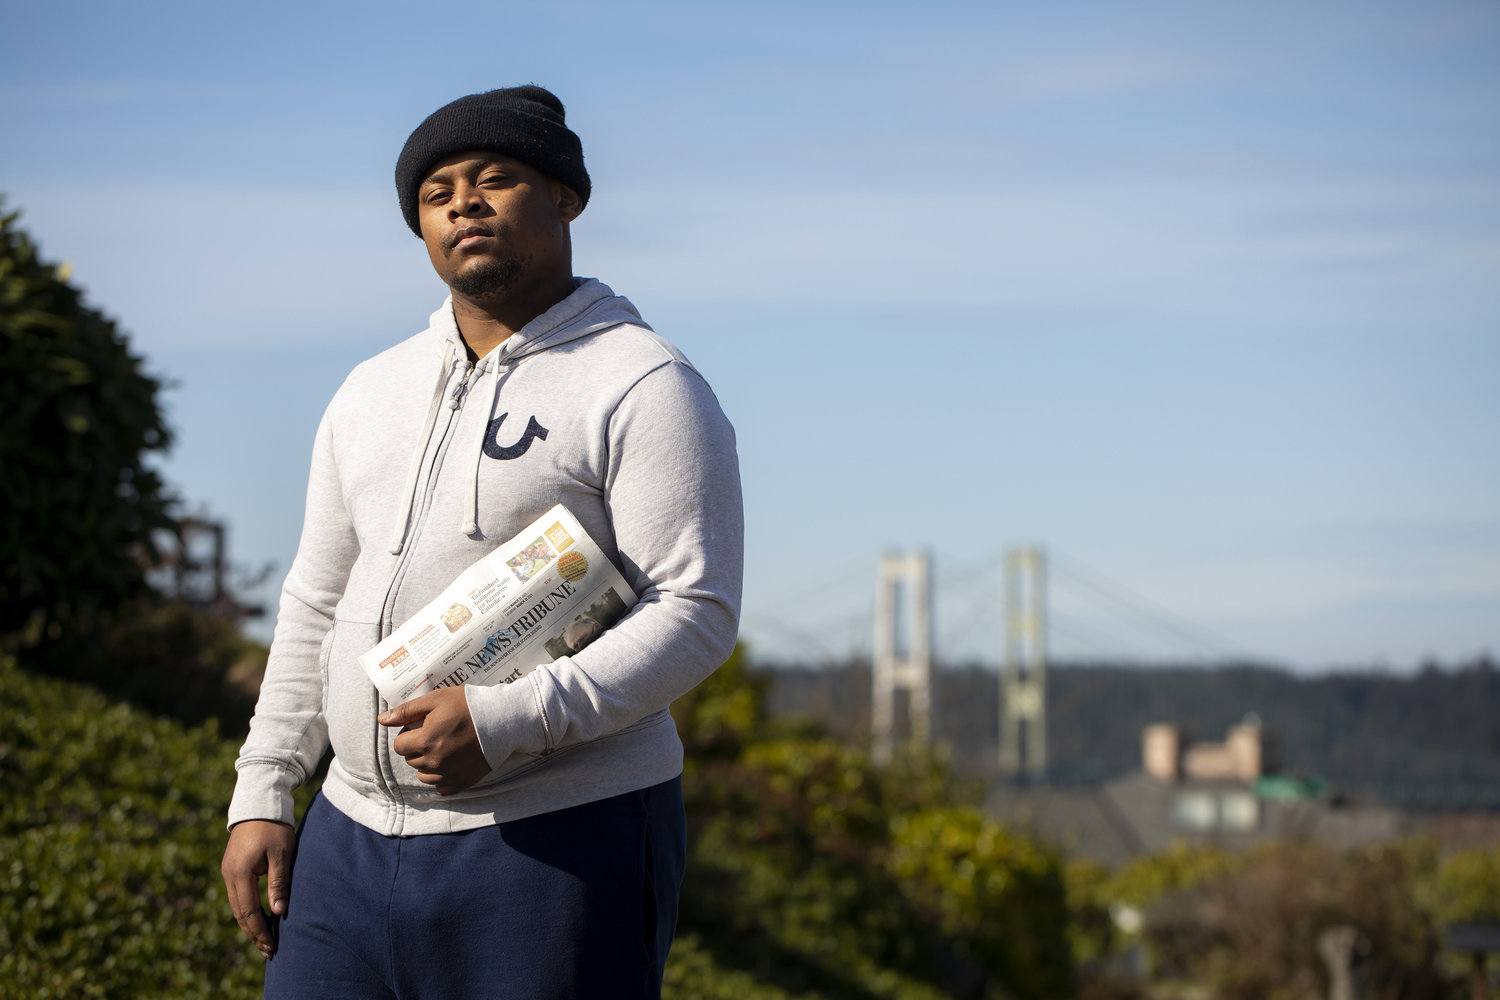 Sedrick Altheimer, 24, was delivering newspapers on his route in the West End of Tacoma, Washington, late at night in January 2021, when a white SUV started following his car in an intimidating manner. Later, he found out that the driver of the car was Pierce County Sheriff Ed Troyer, who did not identify himself and was not in a police car. After a verbal confrontation, Troyer called in more than 40 cops to the scene. "Nobody's ever messed with me like he did," said Altheimer, who has delivered newspapers in the area for several years. "He kept following me. Antagonizing me." (Bettina Hansen/Seattle Times/TNS)